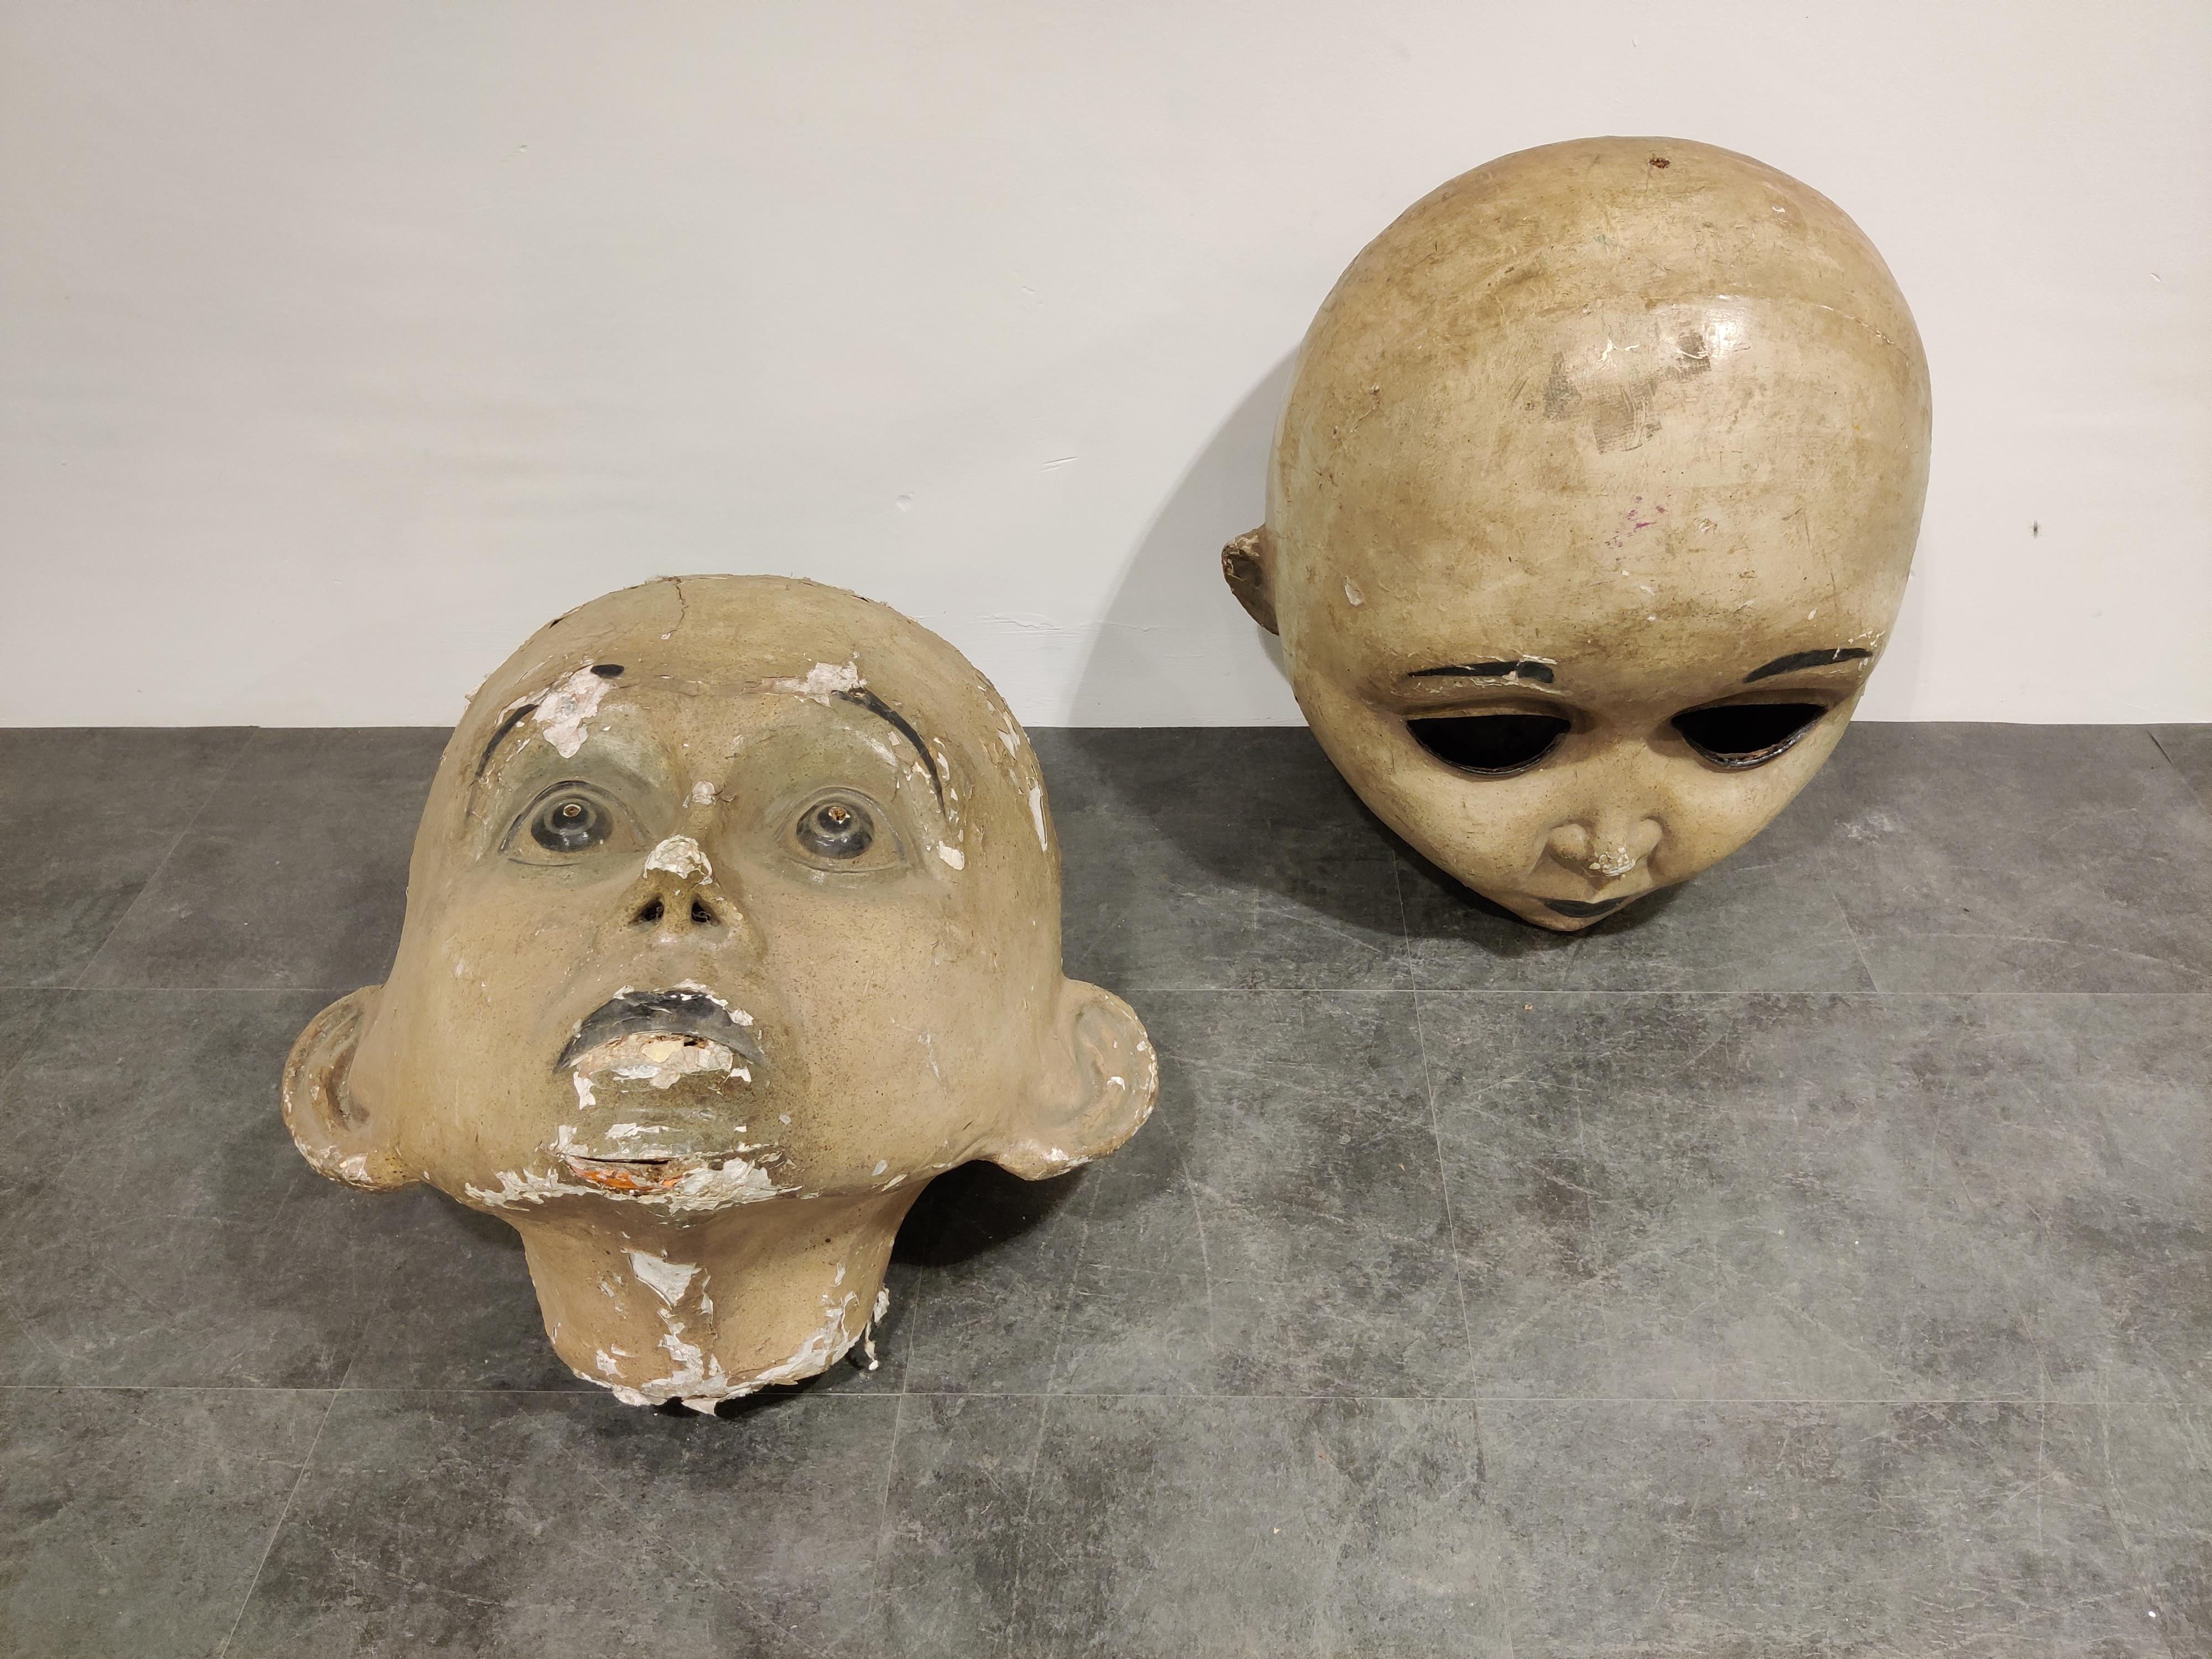 For sale are these rare, large early 20th century carnival masks made from wood and painted papier maché.

Although looking a little creepy and intriguing they have a great decorative potential.

The wear is just right to give them the antique,